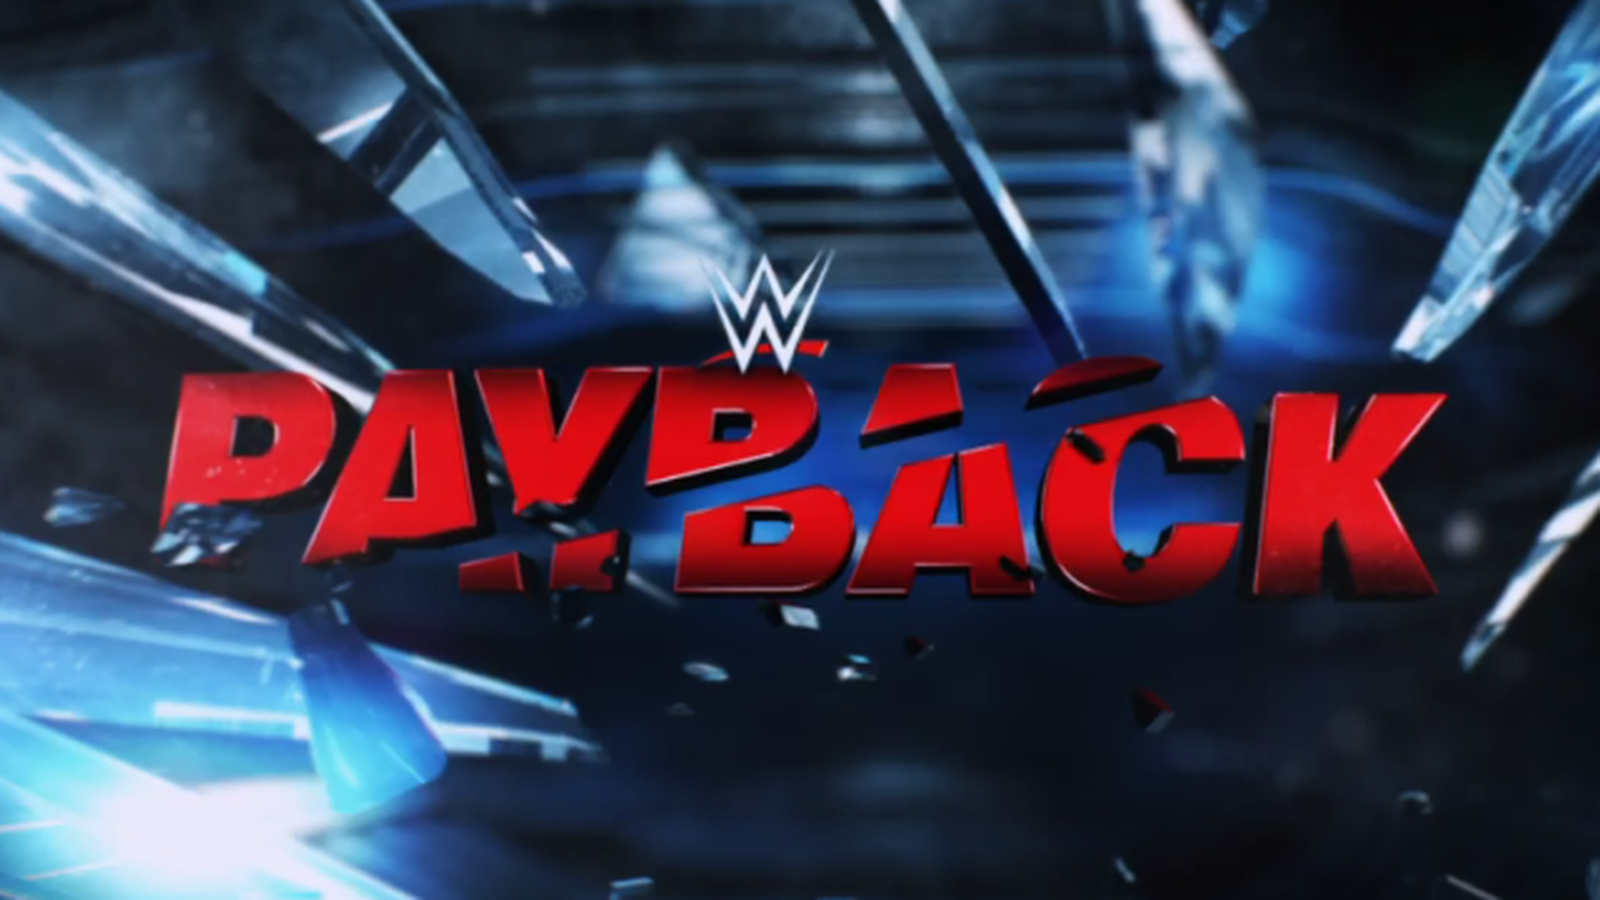 Tag Team Match And Miz TV Announced For WWE Payback Kickoff Show